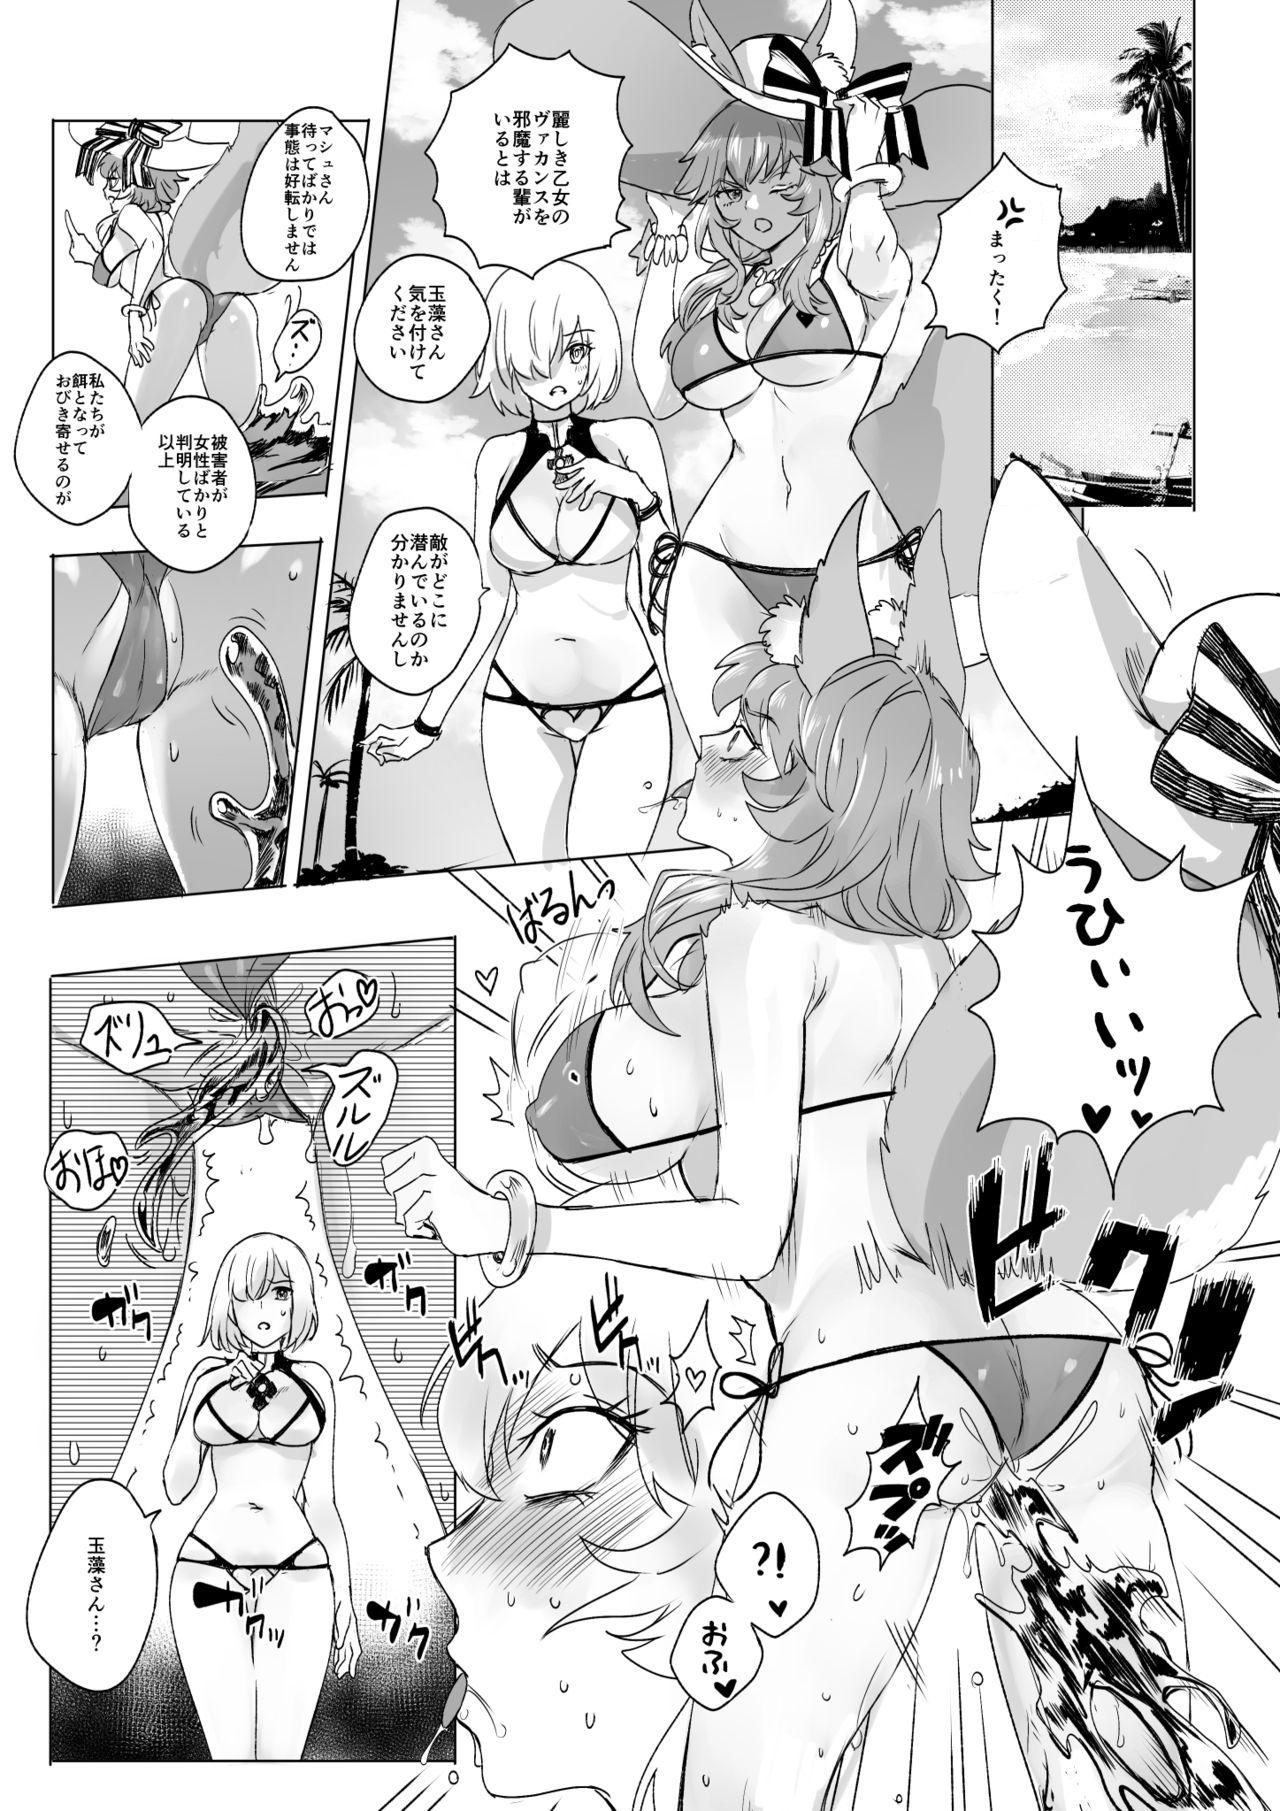 Screaming 水着玉藻の前&マシュ憑依 - Fate grand order Pica - Page 1